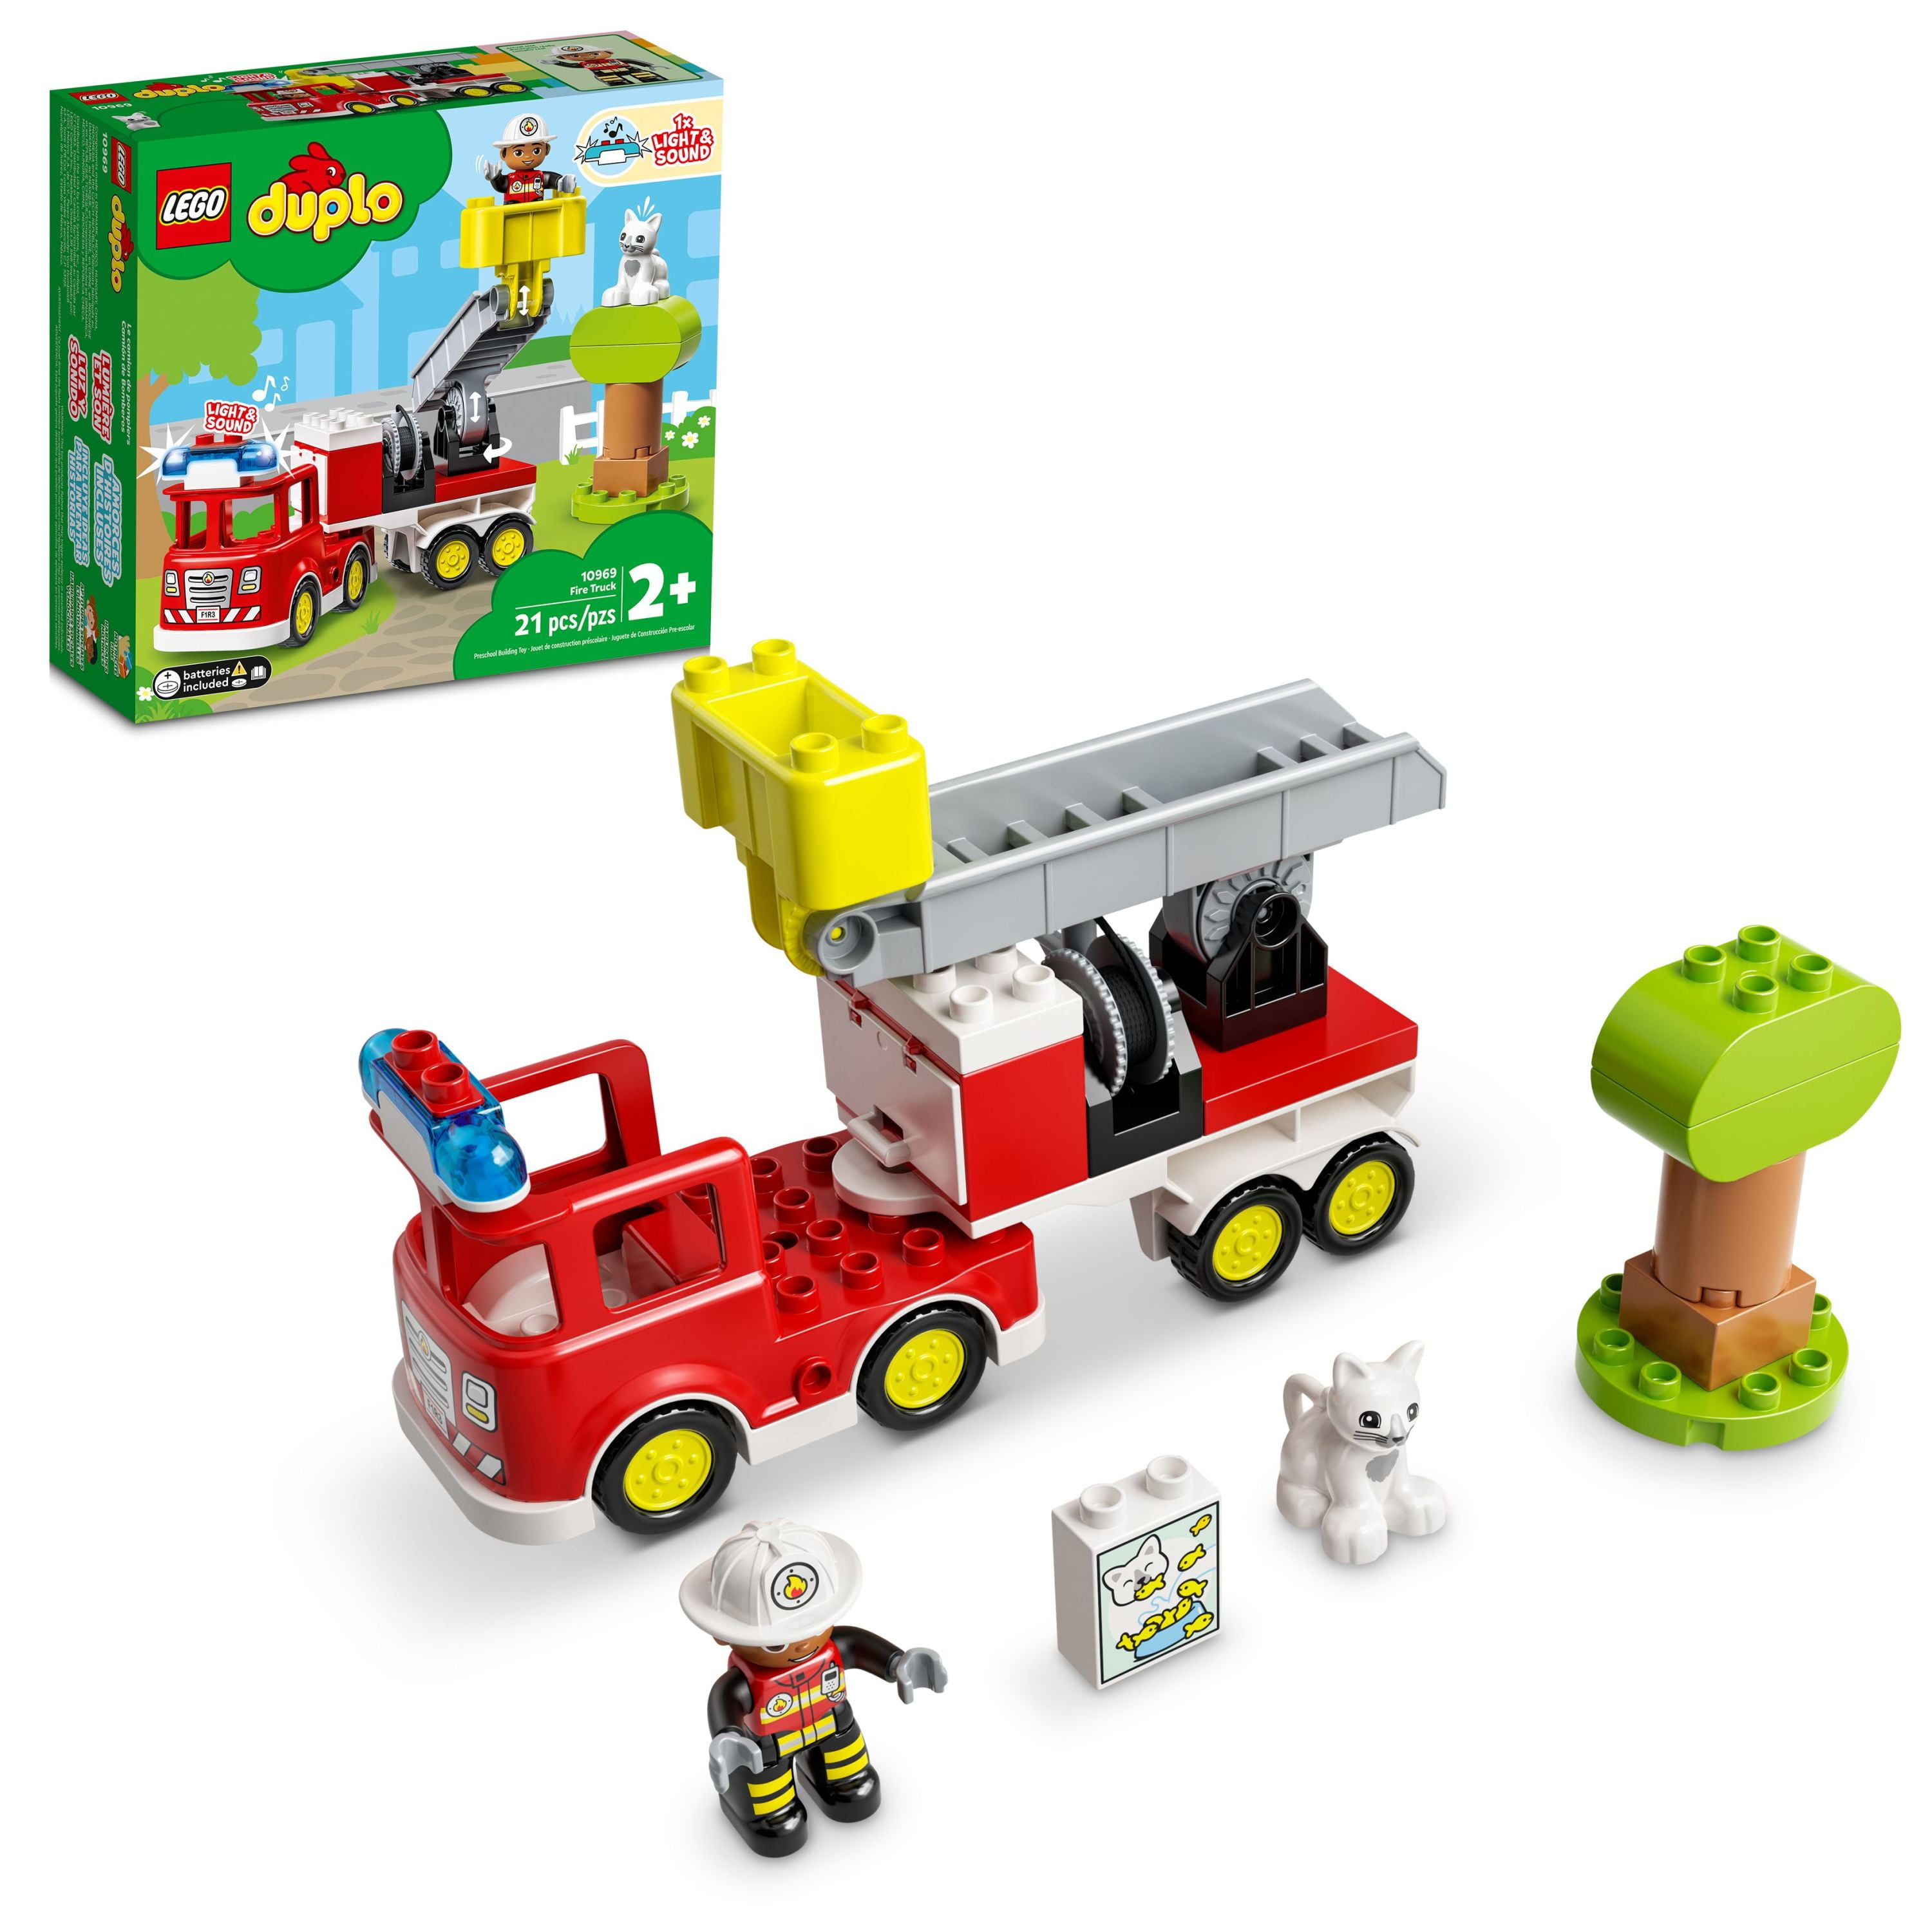 LEGO DUPLO Town Fire Engine 10969 Toy for Toddlers 2 Plus Old, Truck with Lights and Firefighter & Cat Figures, Learning Toys - Walmart.com